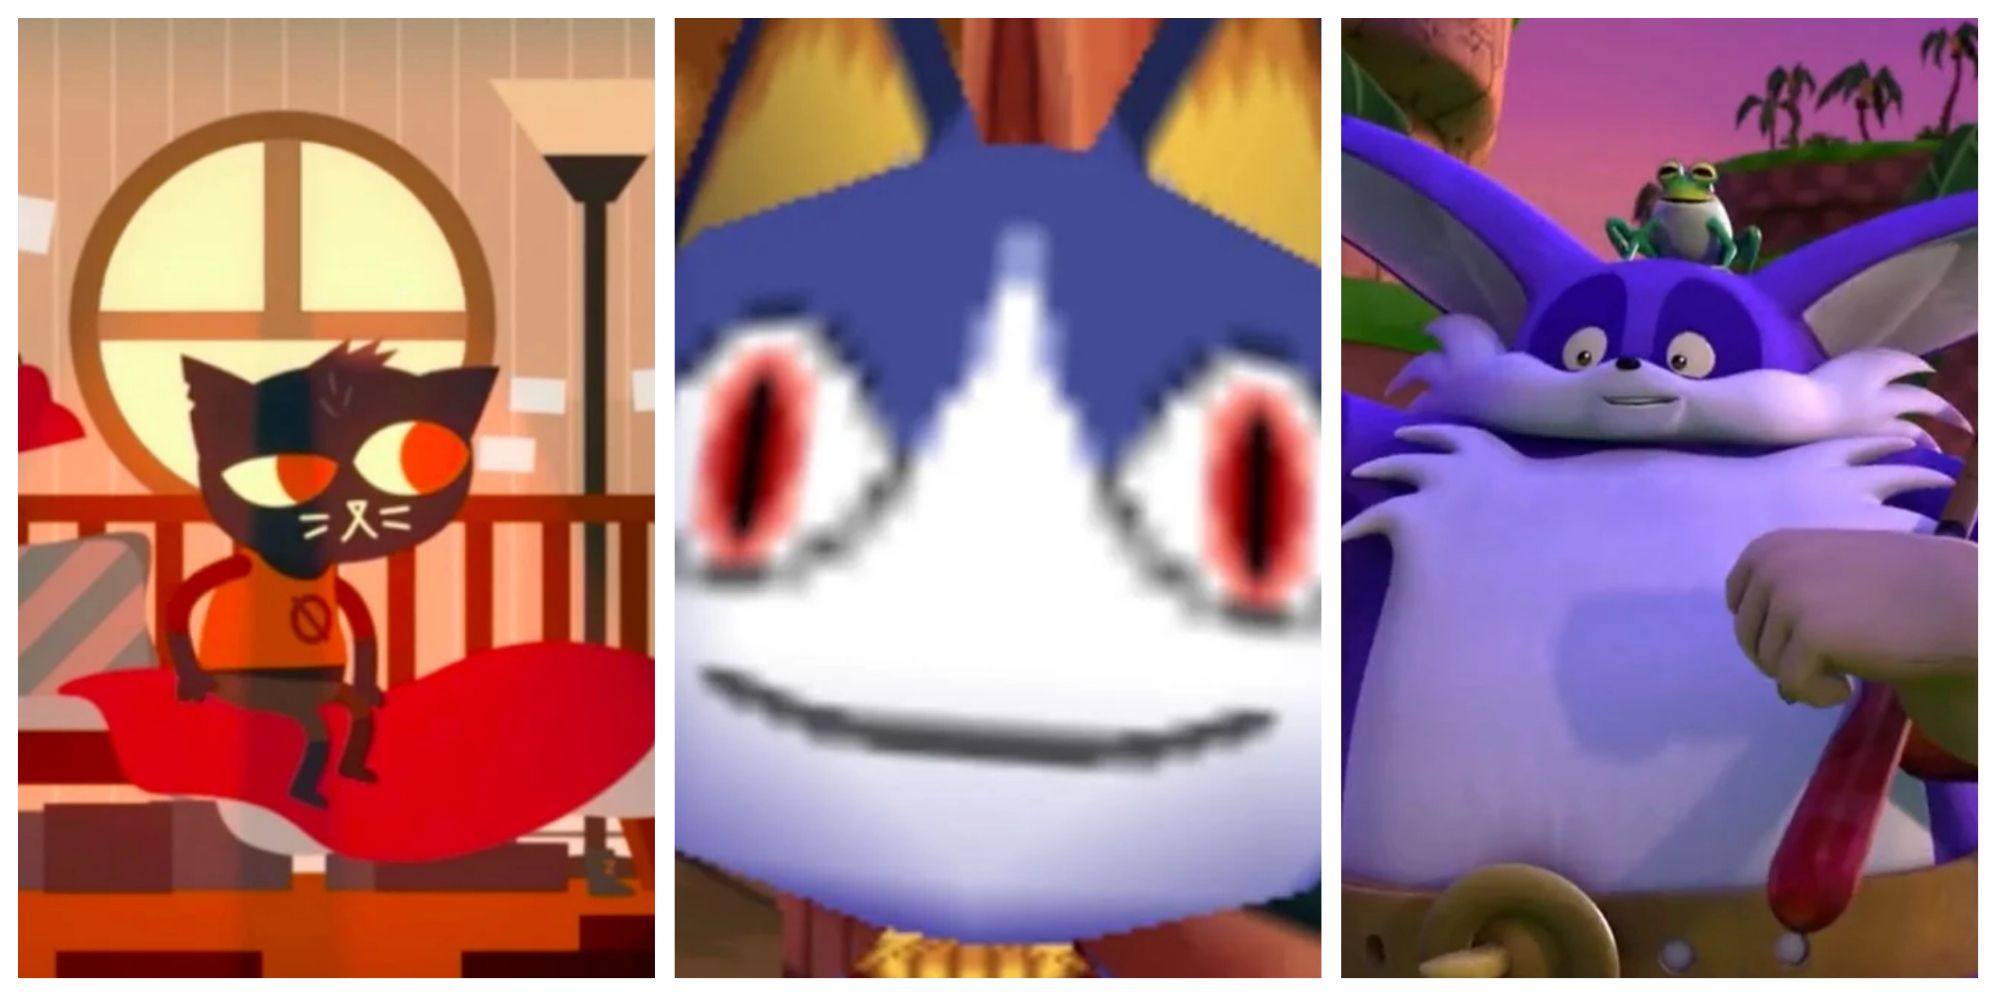 A collage of images of Mae Borowski from Night In The Woods, Rover from Animal Crossing, and Big The Cat from Sonic The Hedgehog